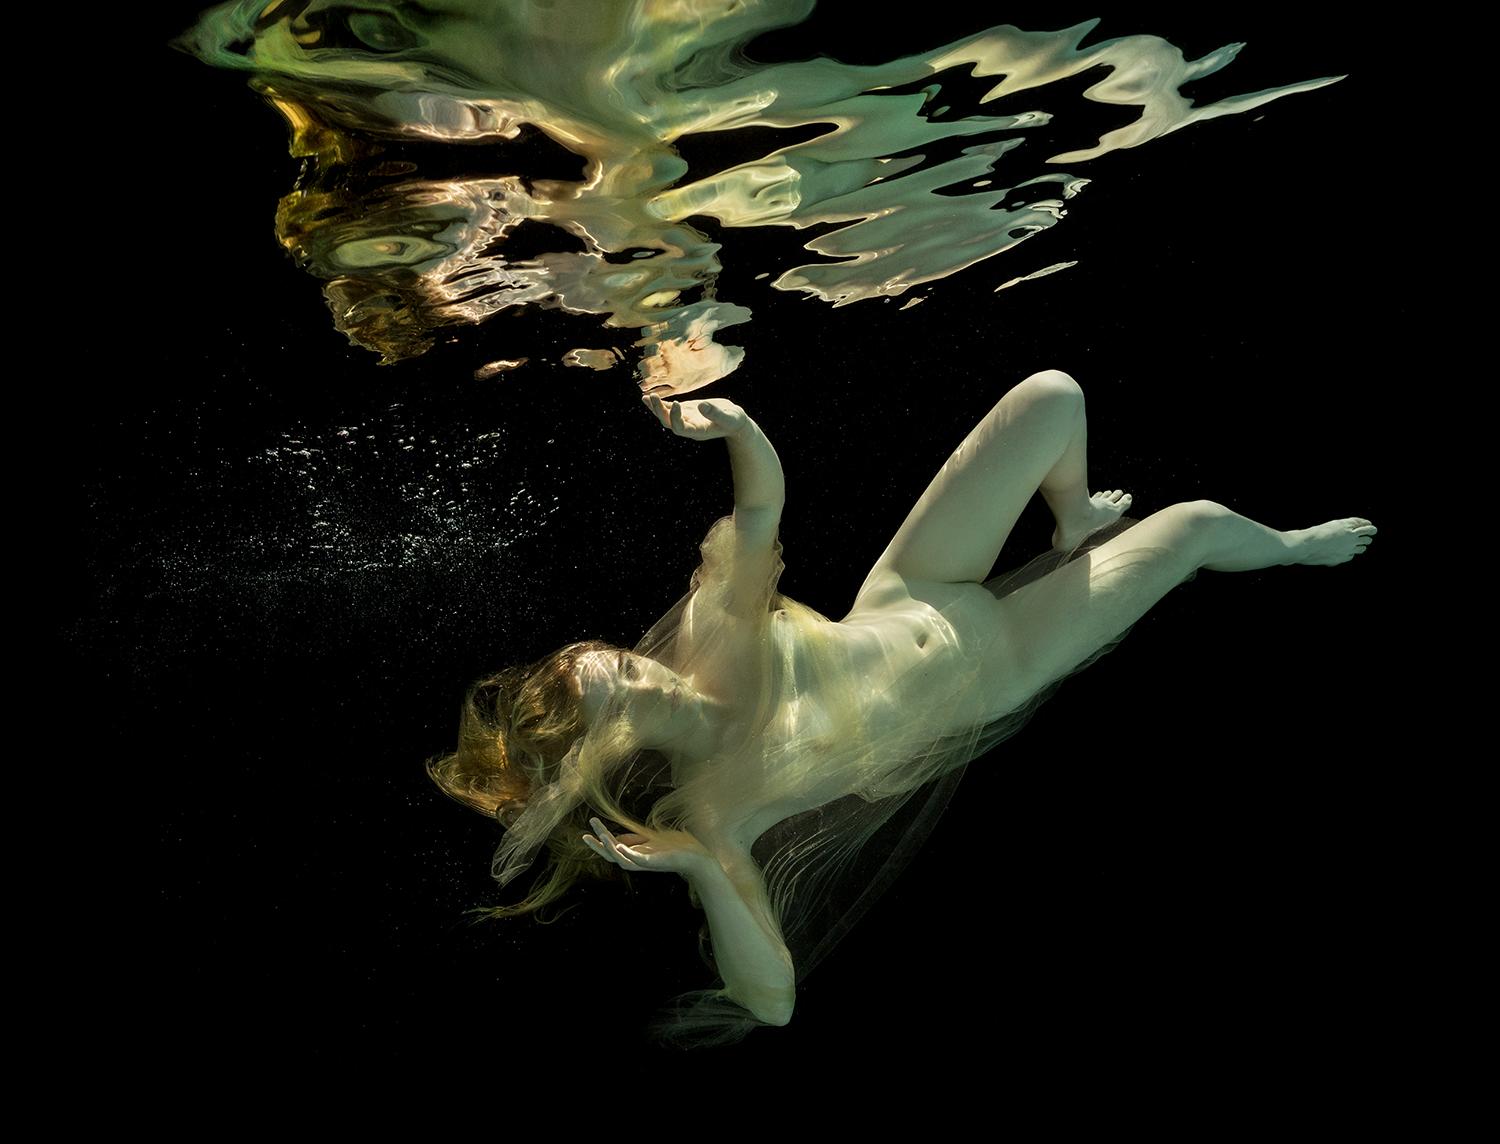 Alex Sher Nude Photograph - Danae and Zeus - underwater nude photograph - print on paper 17.5x22"